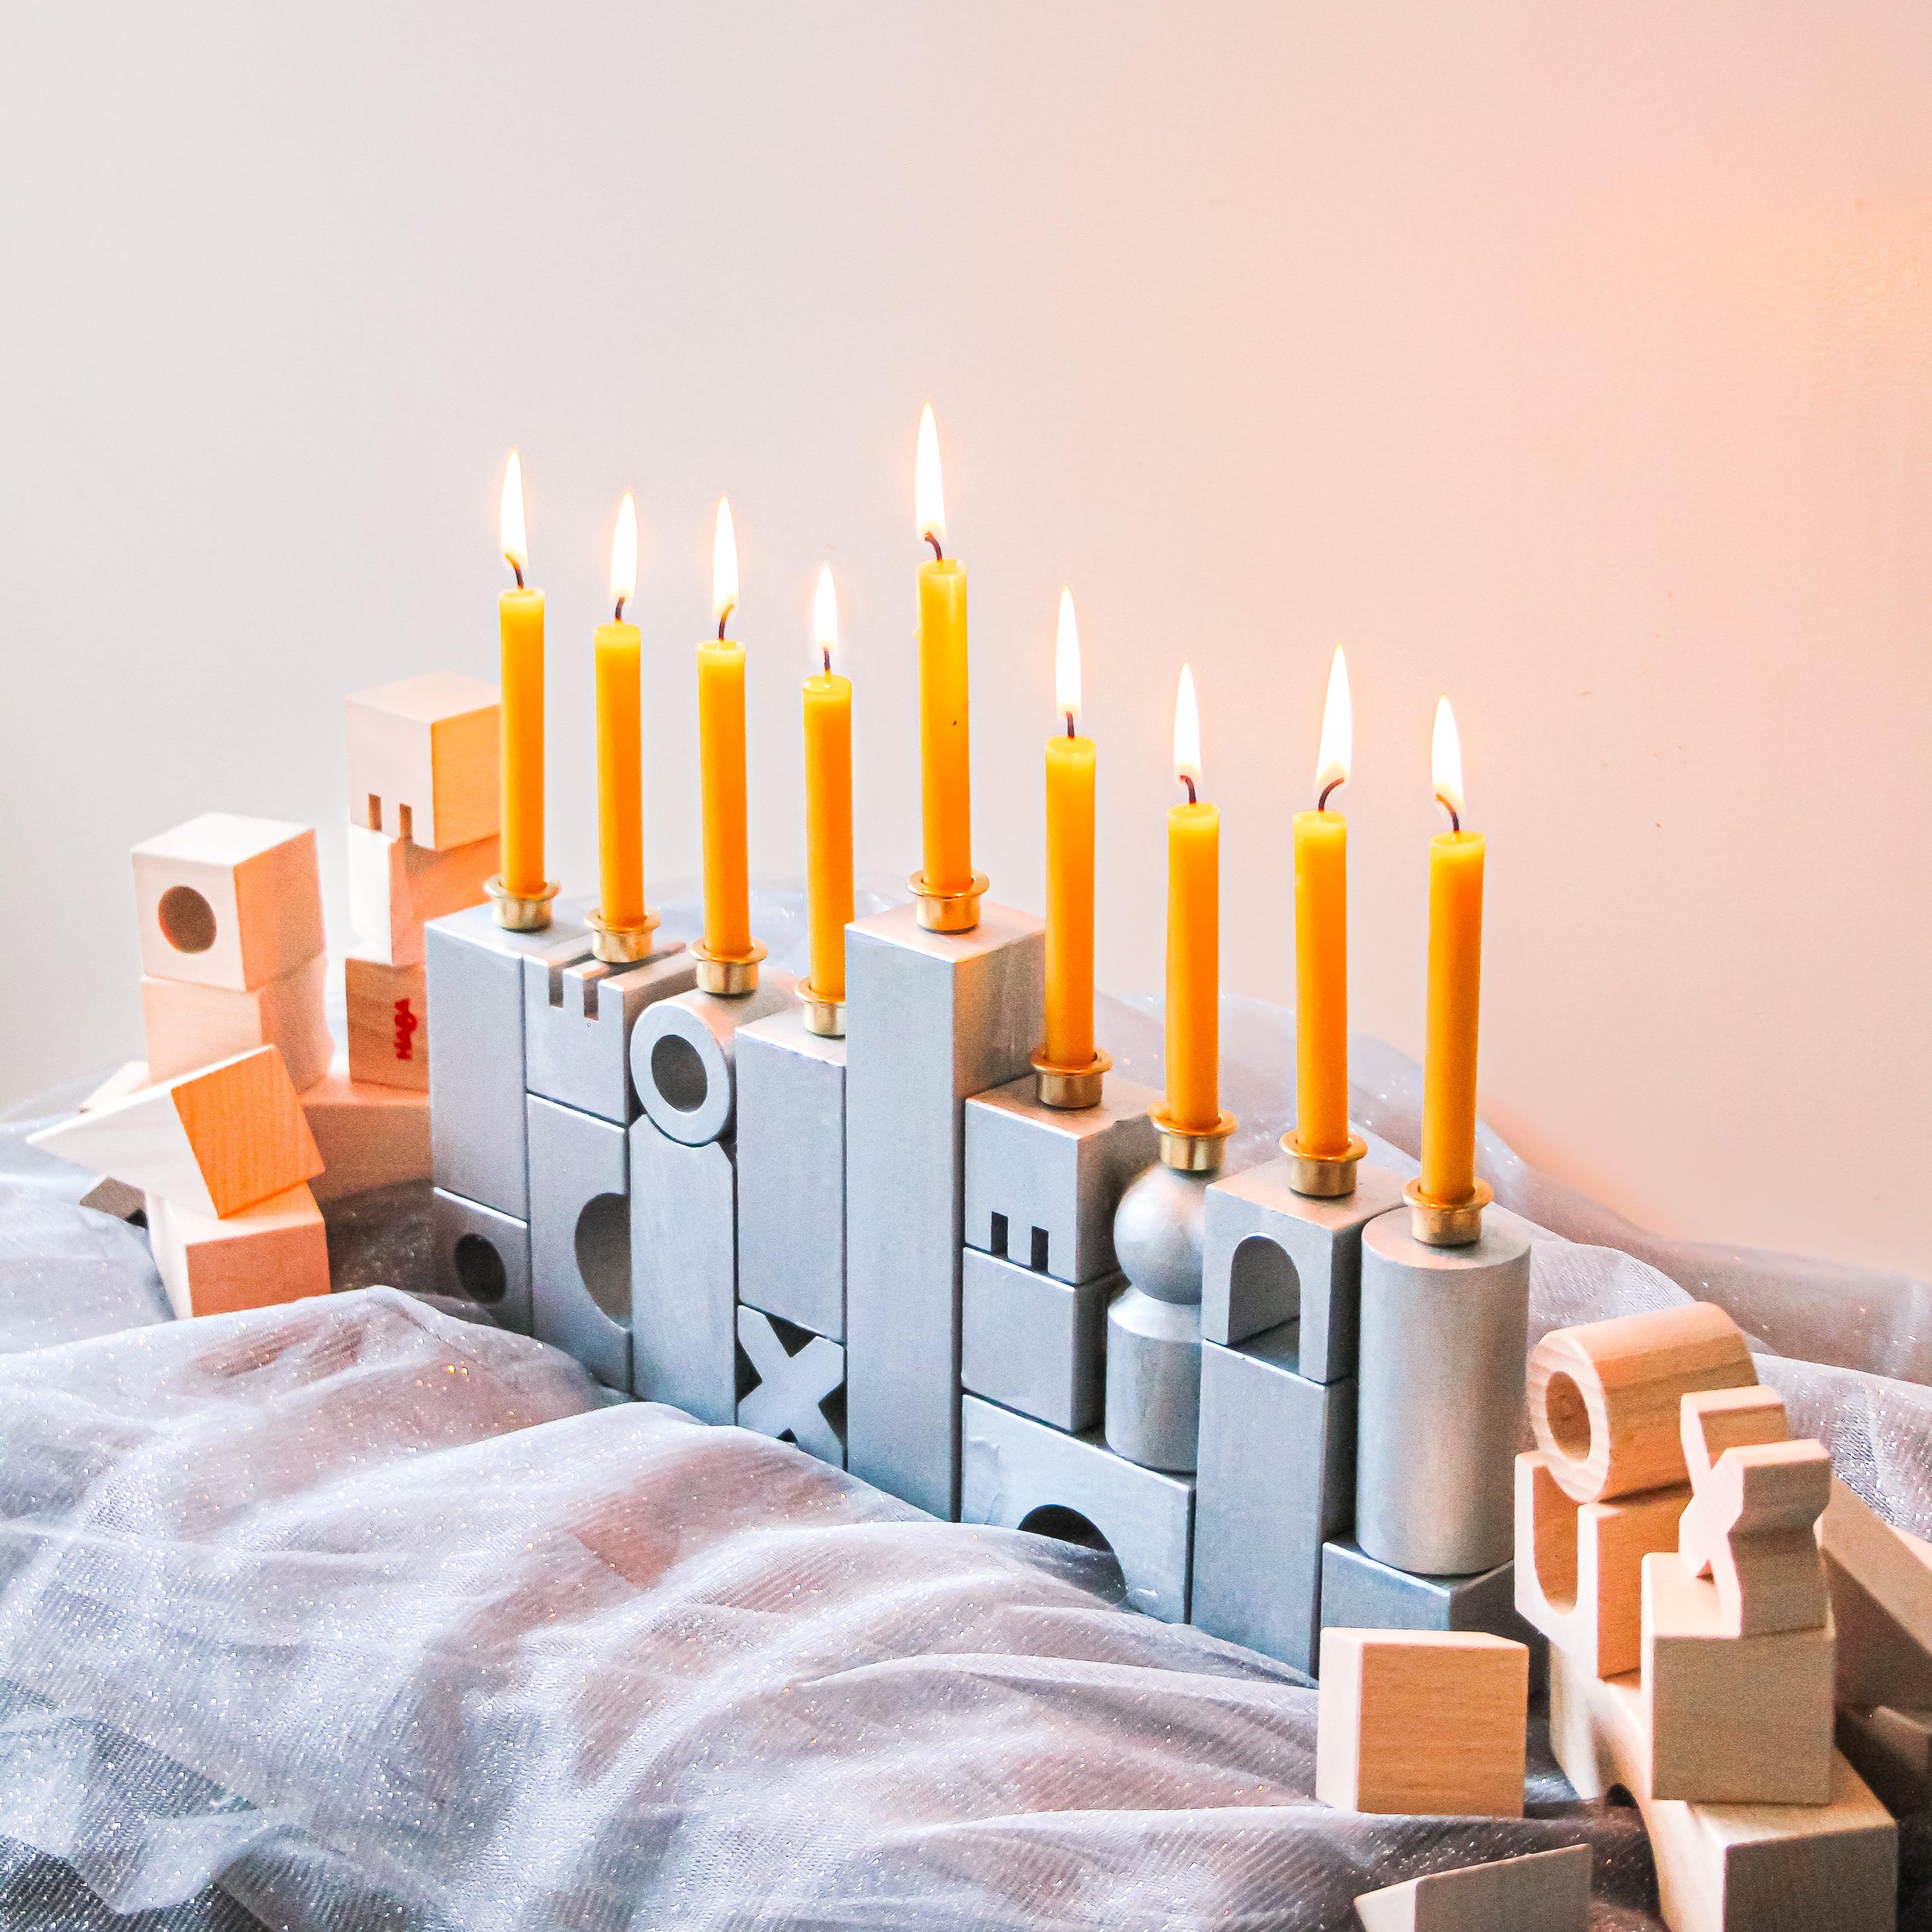 A HABA DIY Block Menorah Sits on a table with unpainted wooden blocks and sparkly fabric.